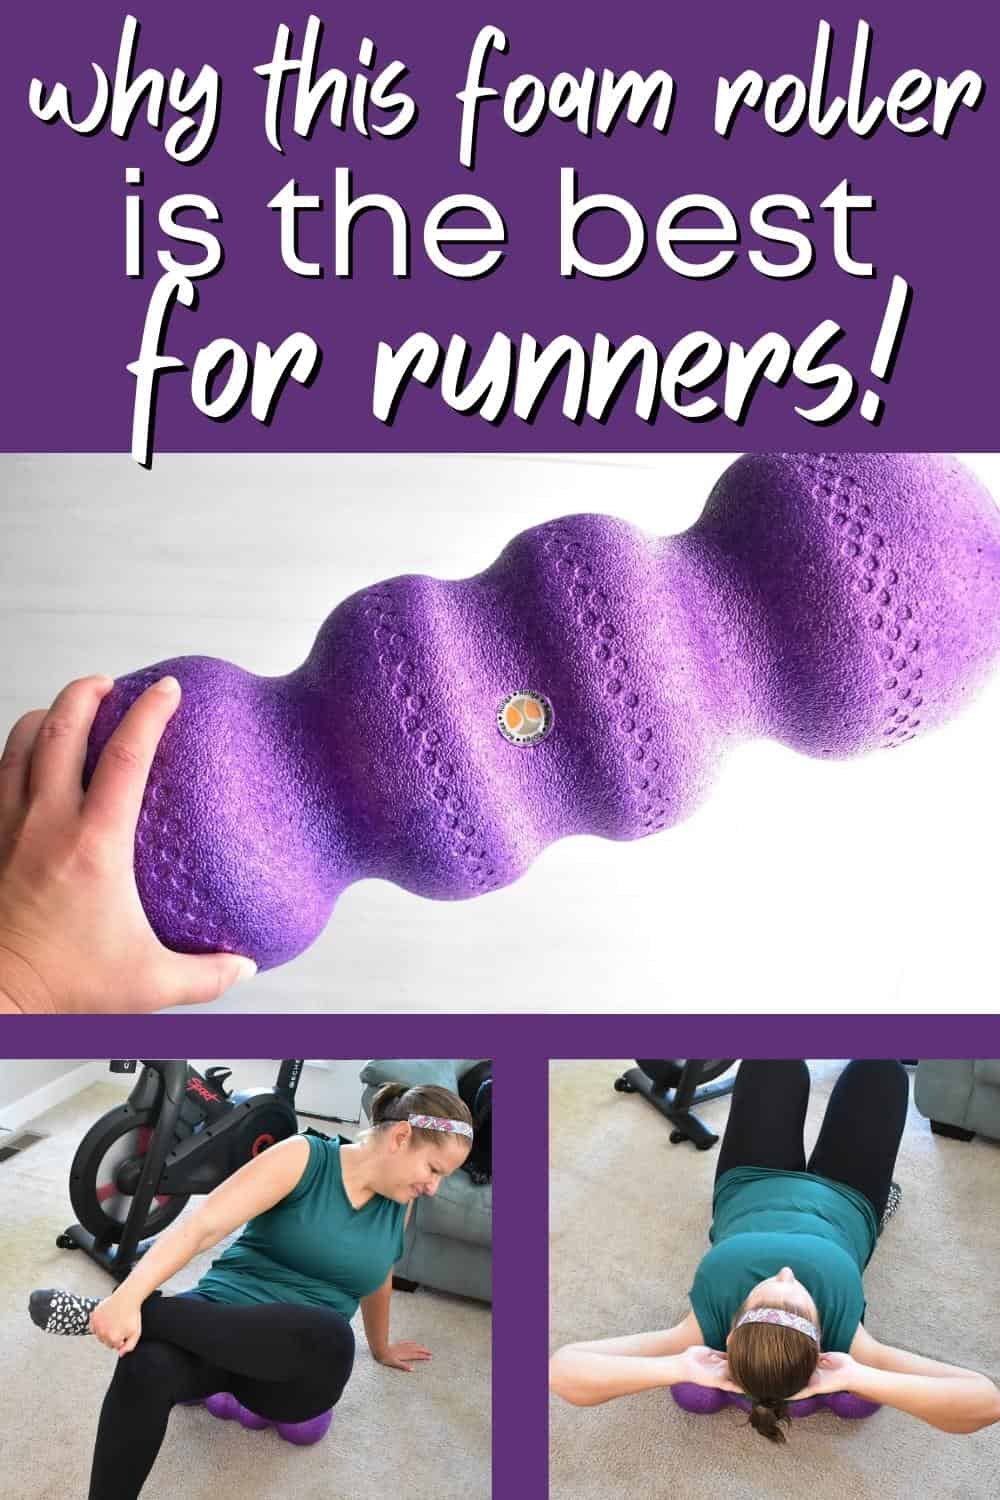 A collage of a Rollga foam roller, a woman rolling her glutes, and a woman rolling her upper back, with a text overlay that says why this foam roller is the best for runners.